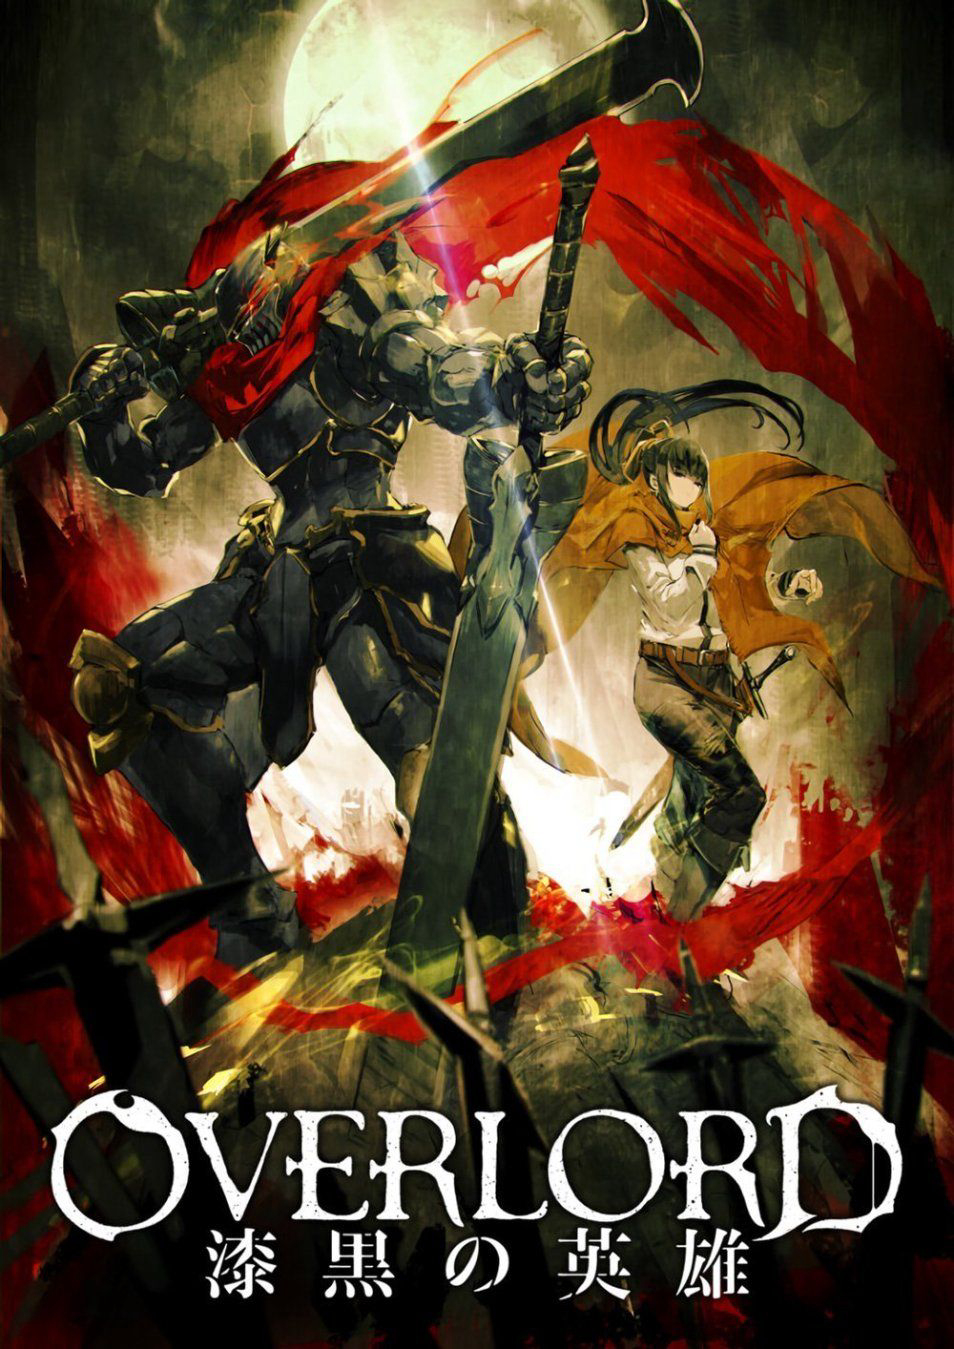 Poster Phim Overlord: Chiến binh bóng tối (Overlord: The Dark Warrior)